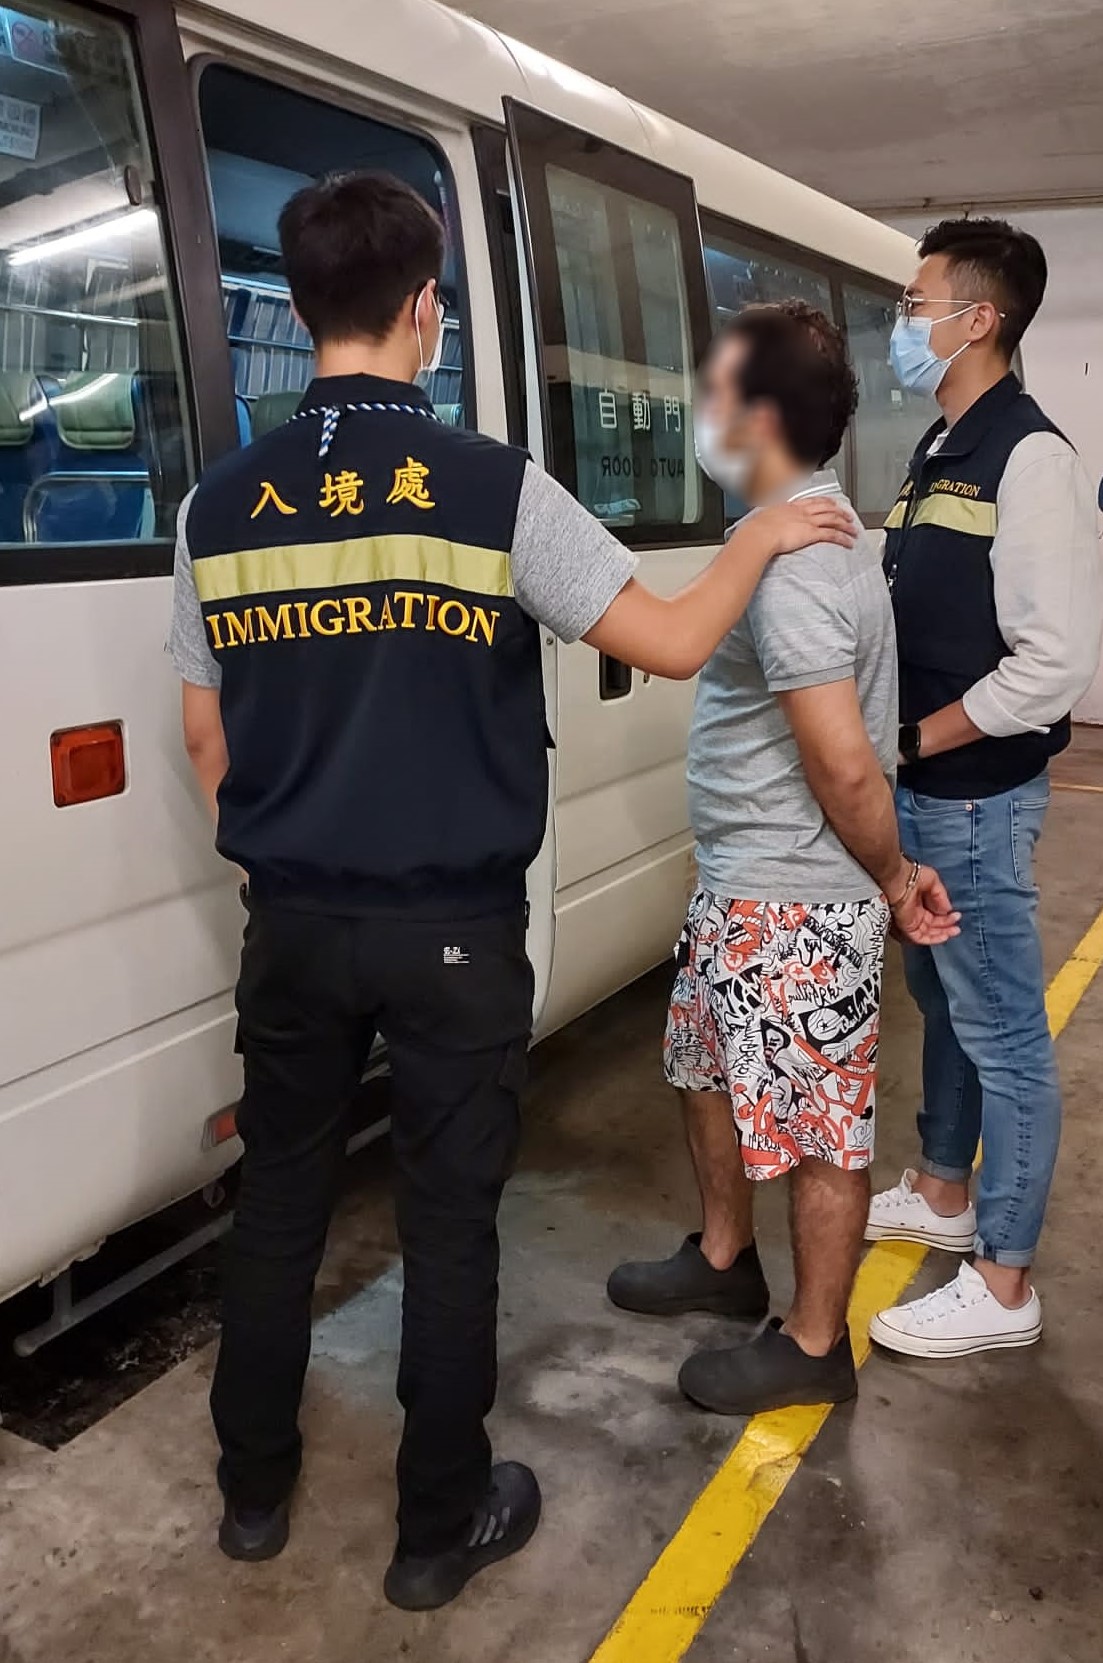 Photo shows a suspected illegal worker arrested during the operations.